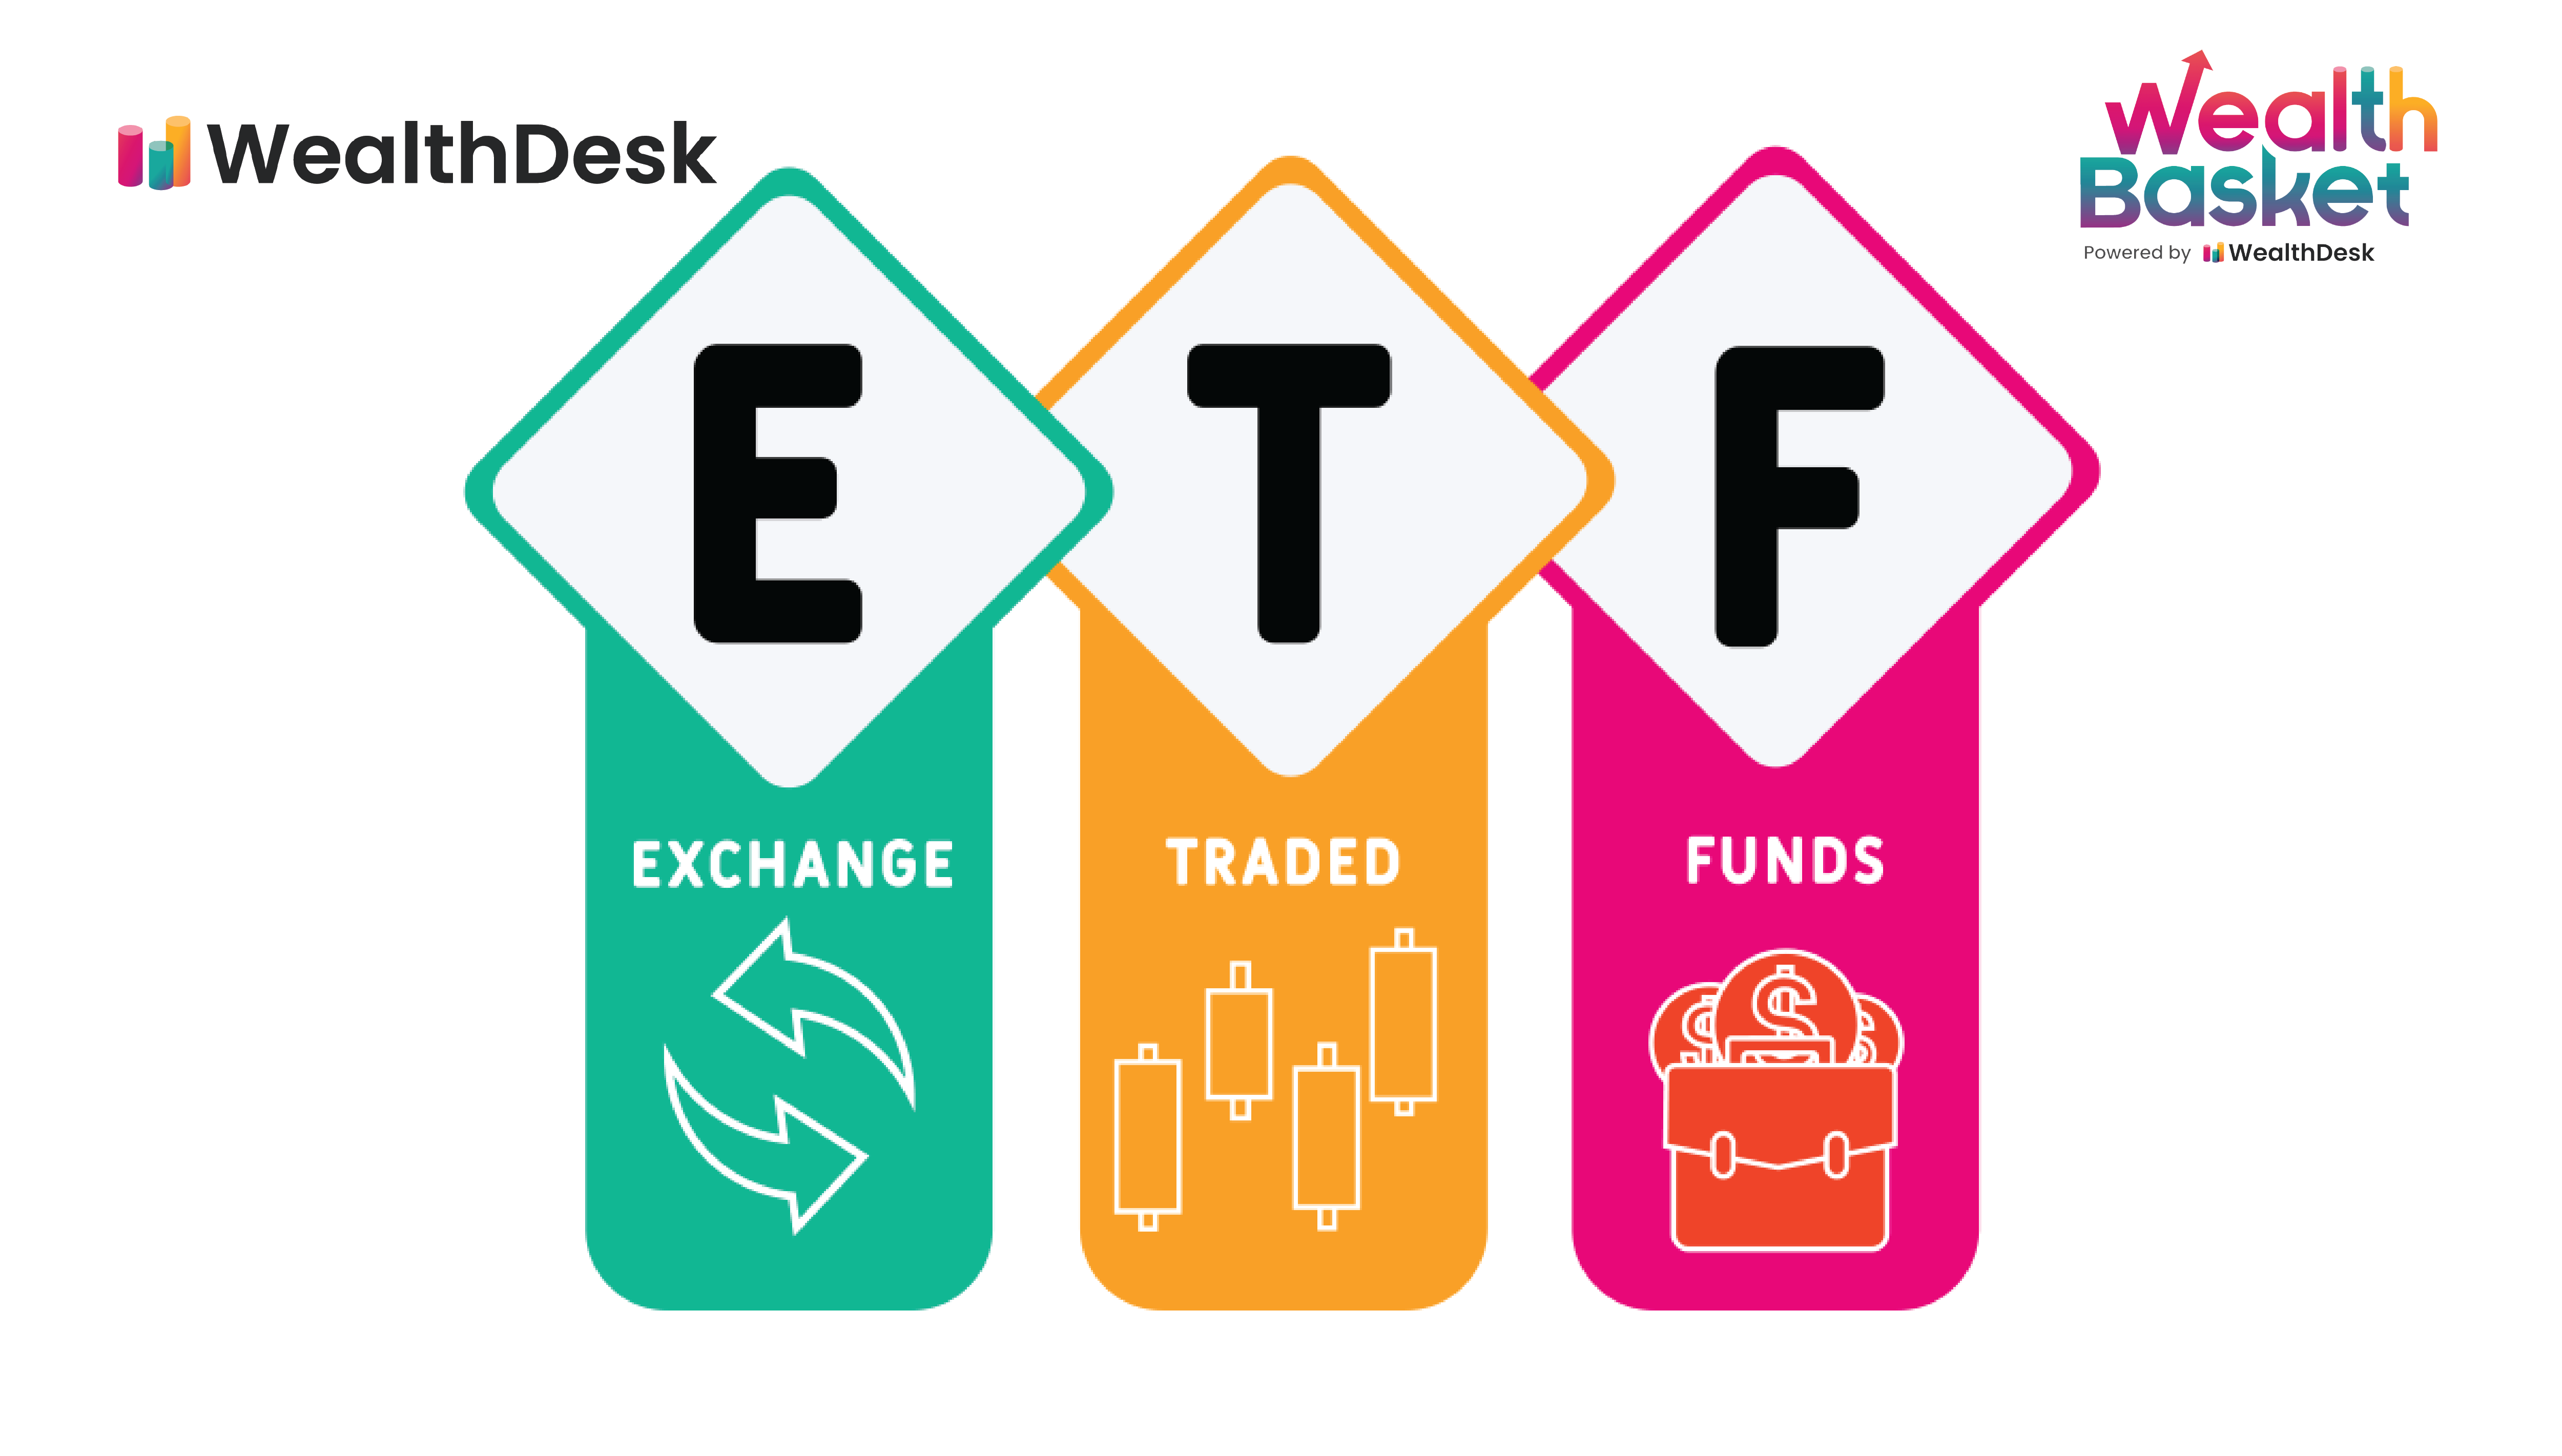 ETF Investing  The Systematic Trader